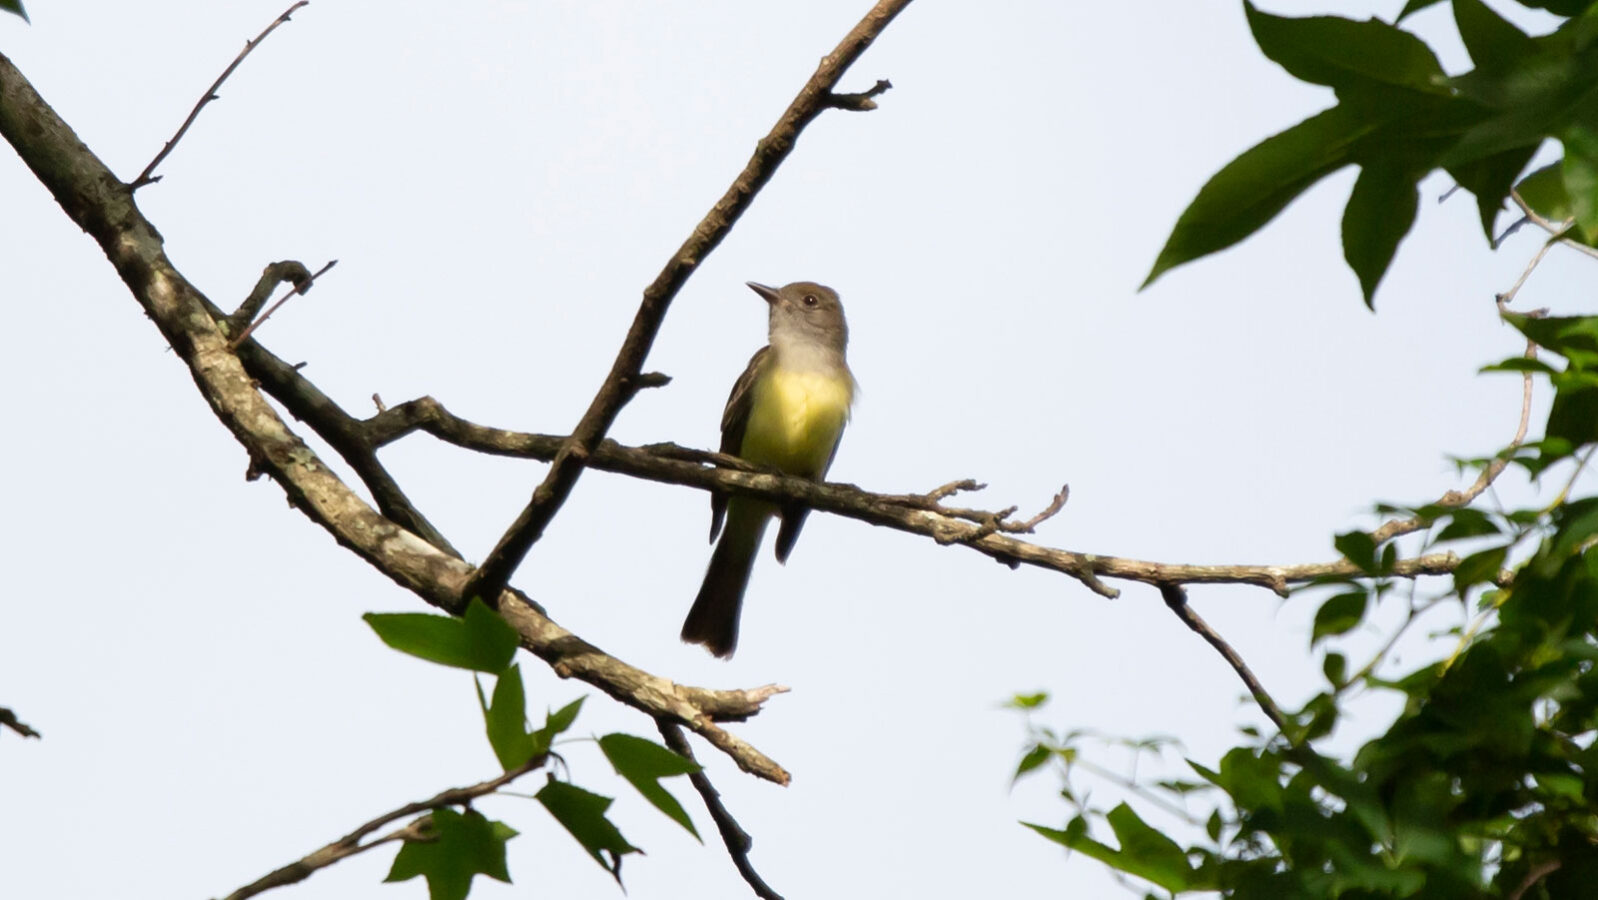 Great-crested flycatcher looking to the side